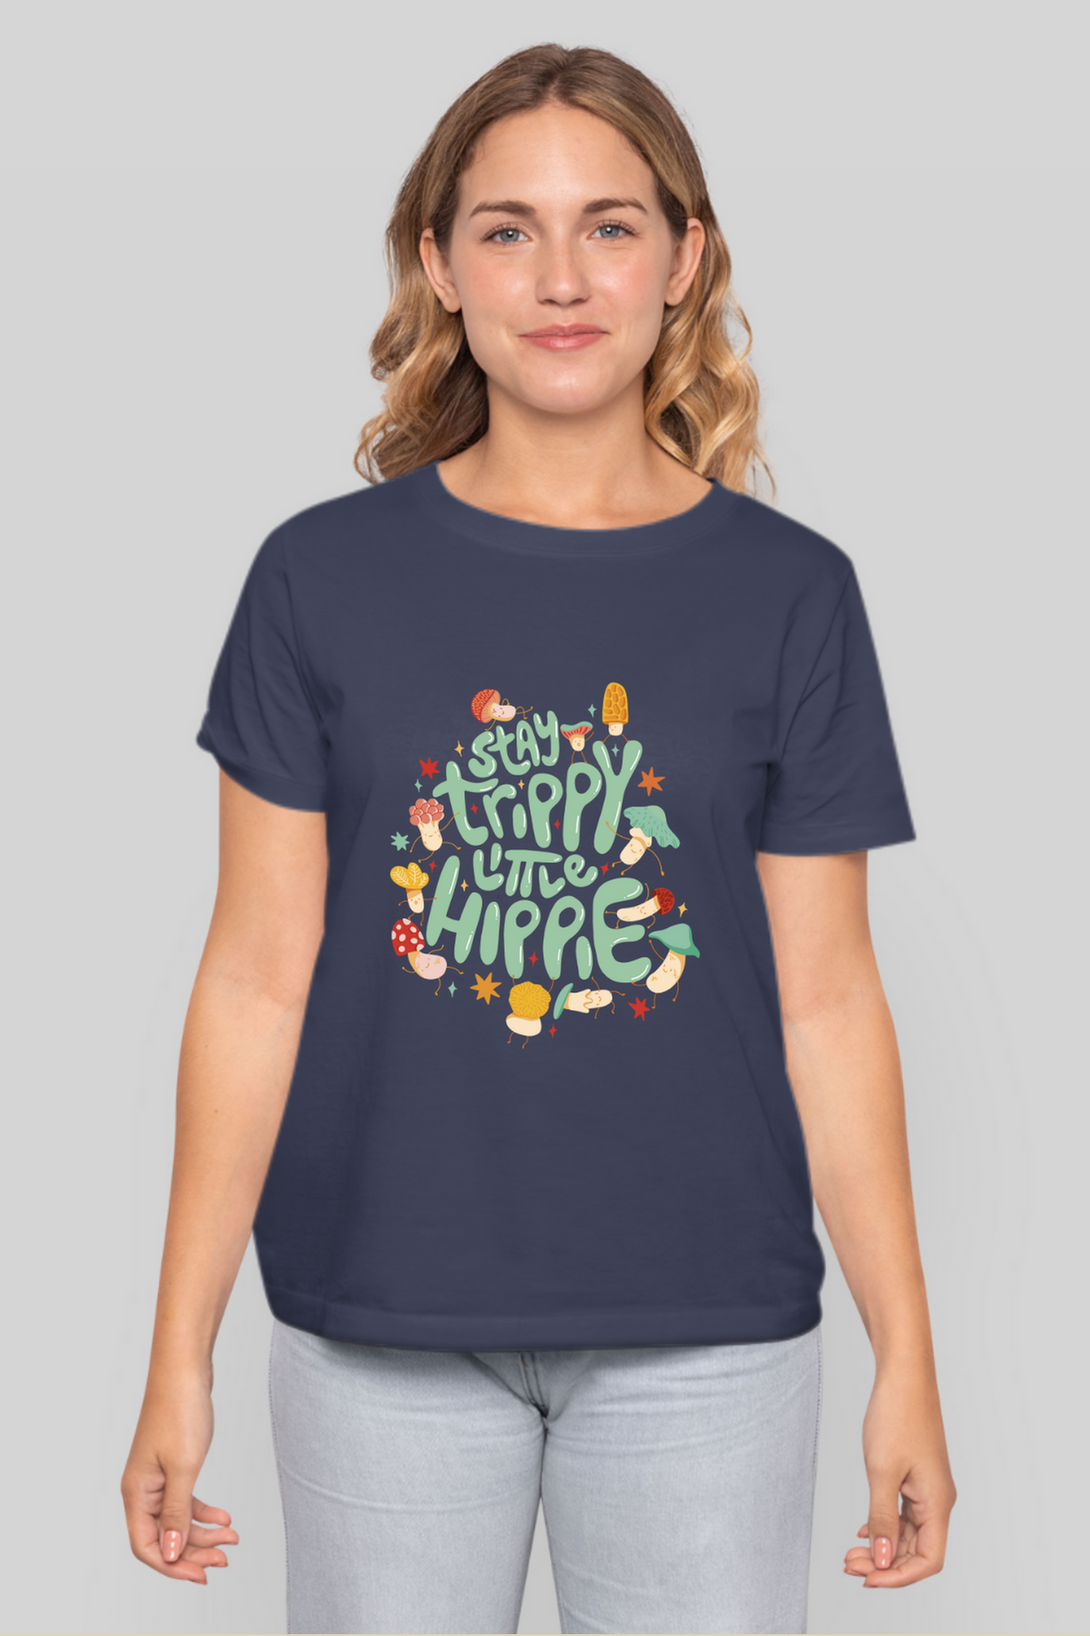 Stay Trippy Little Hippie Printed T-Shirt For Women - WowWaves - 9